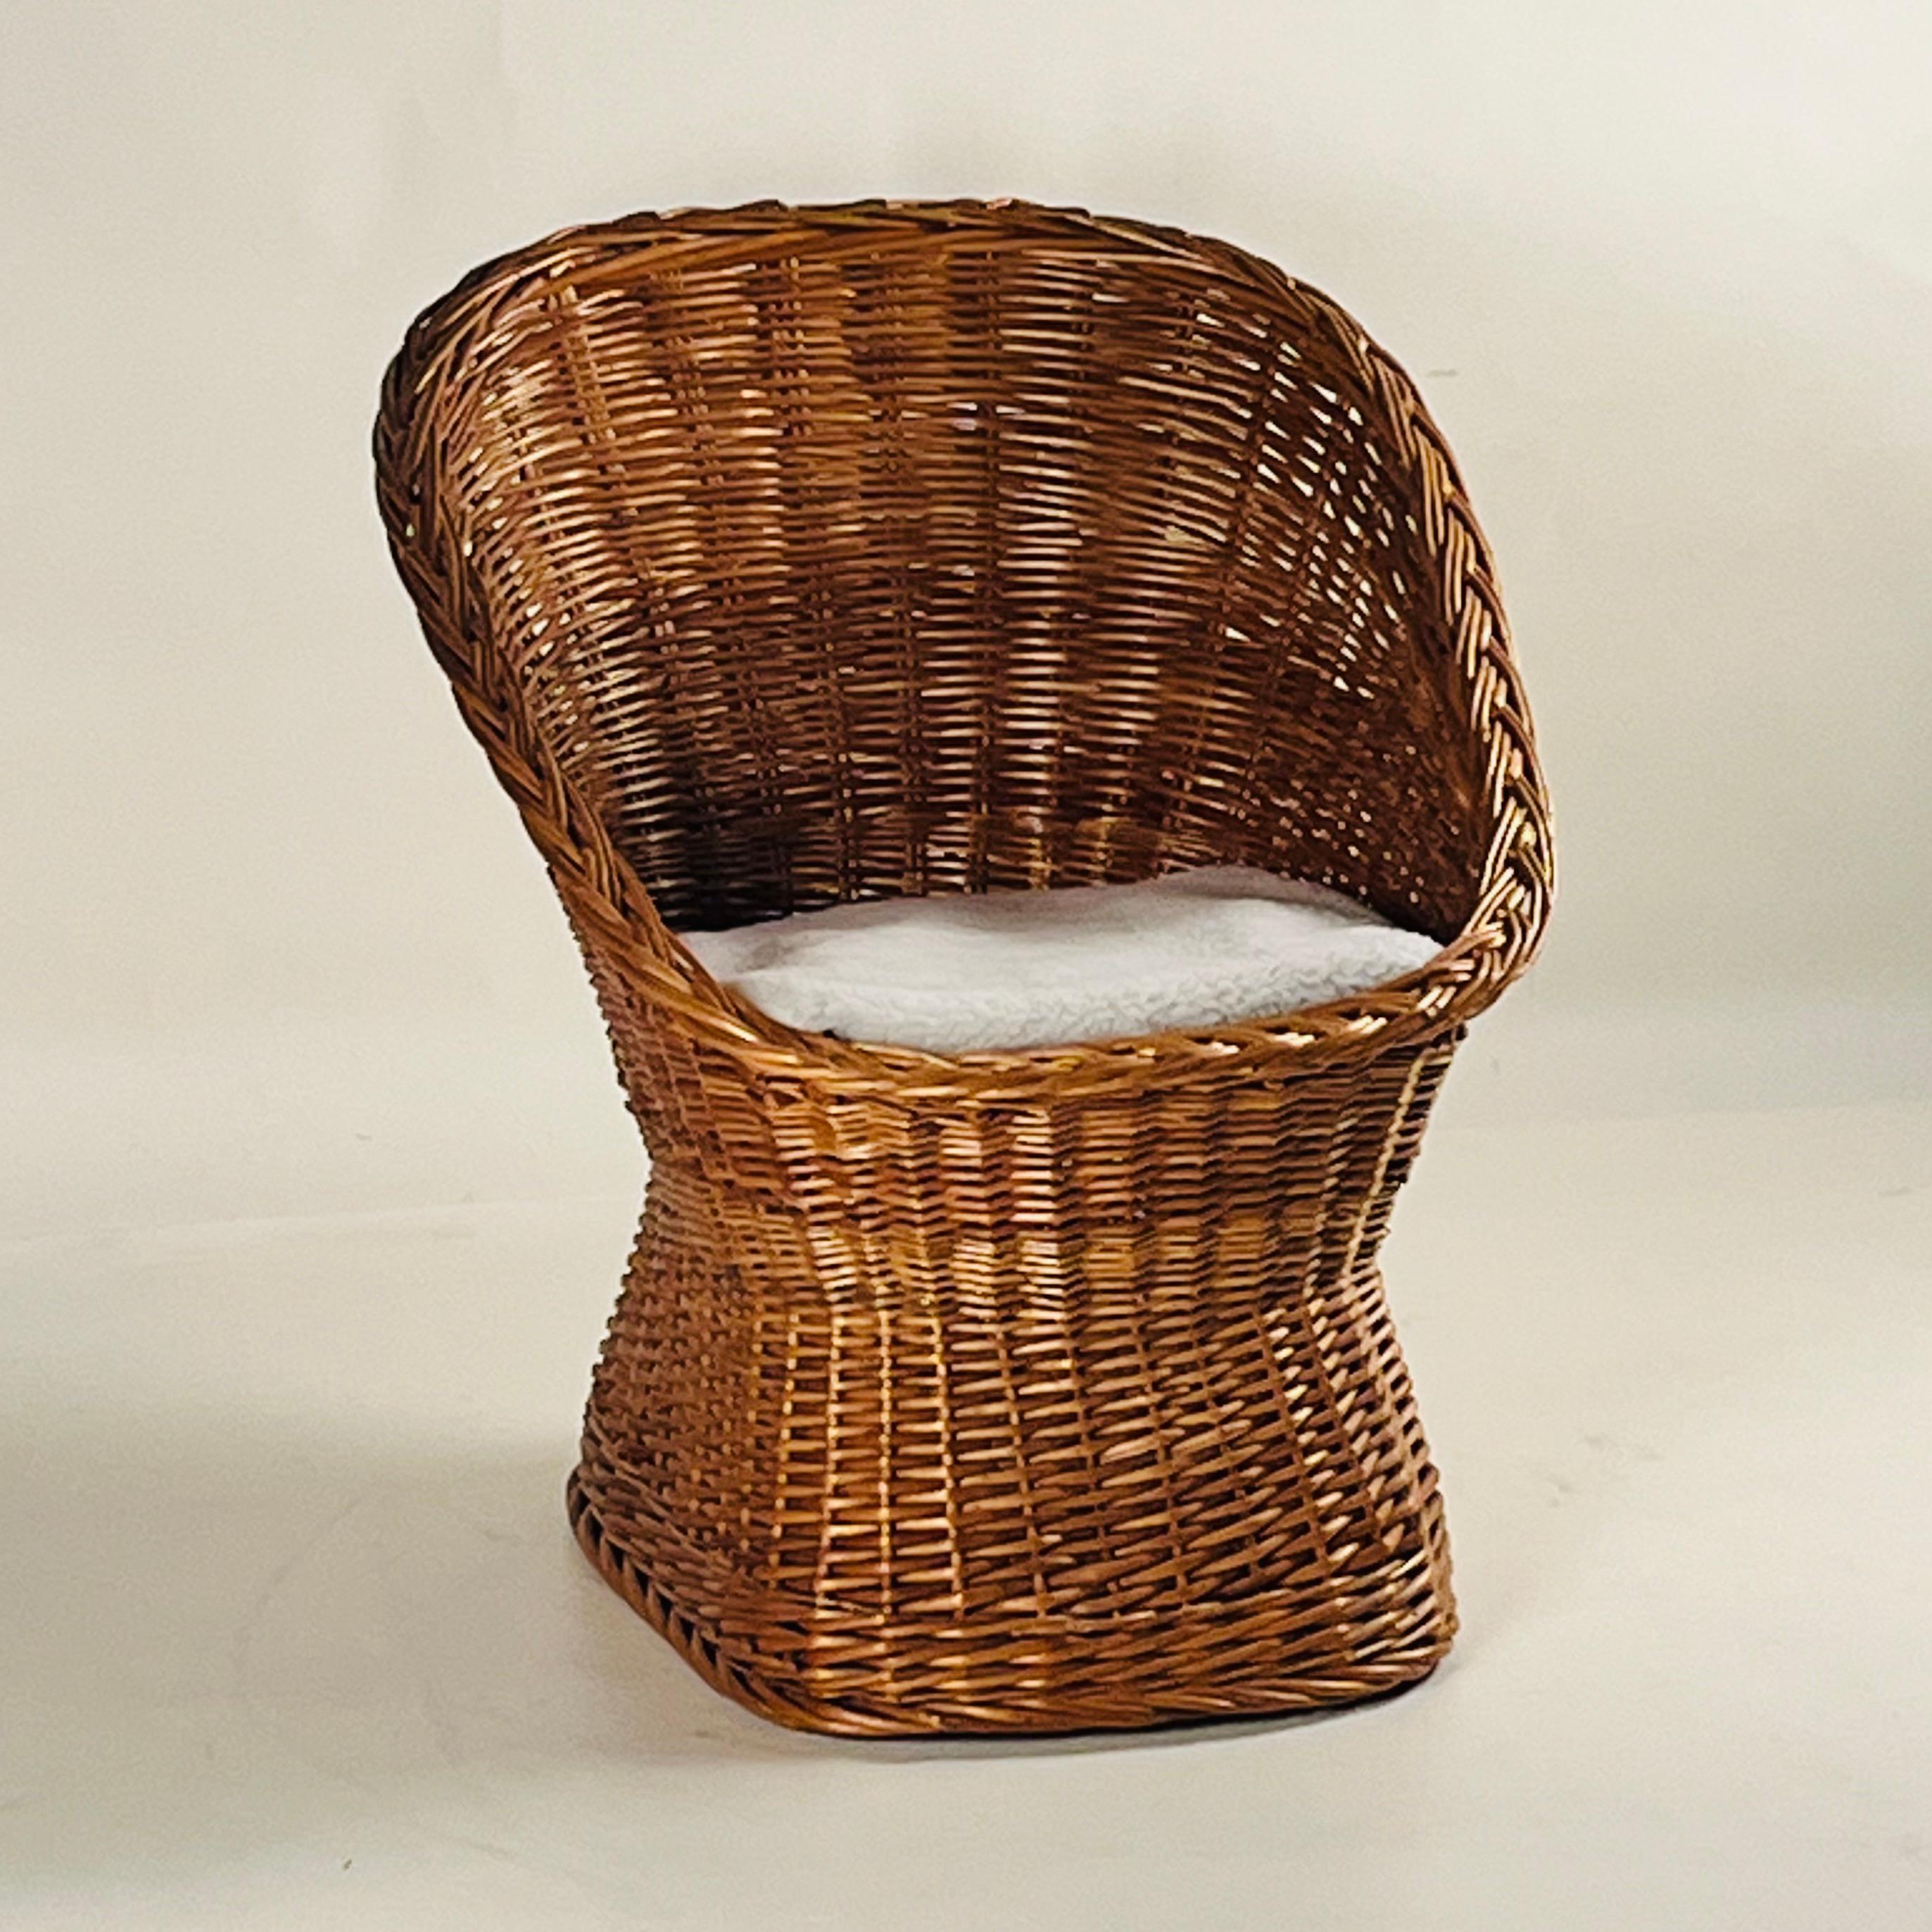 Woven Rattan Wicker Barrel Chair with Shearling Pad For Sale 7